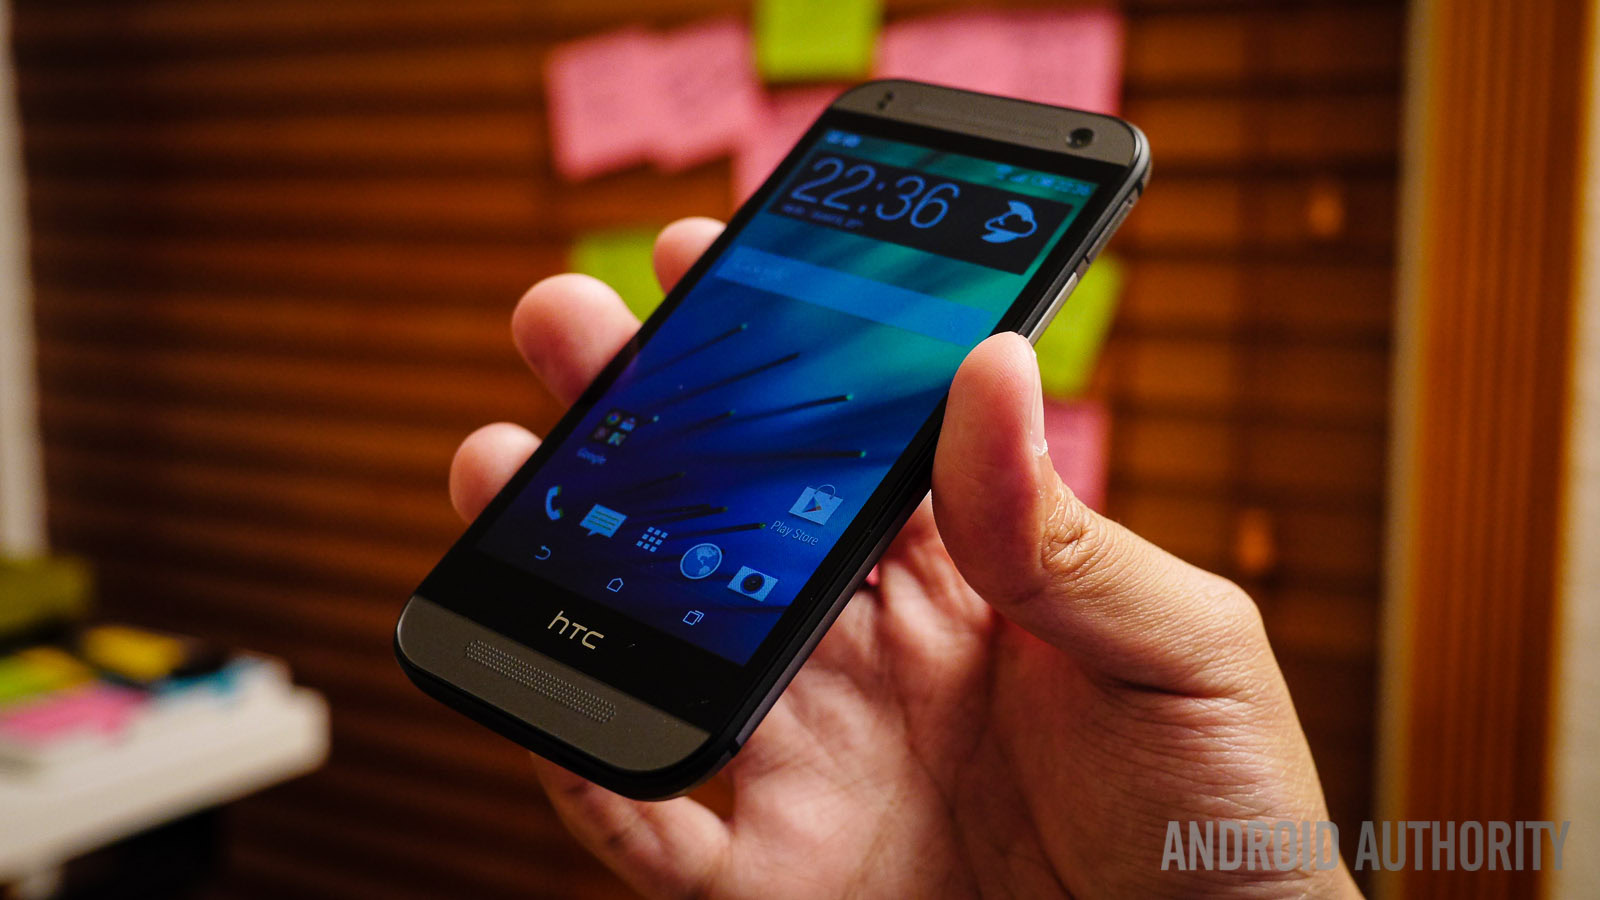 HTC One Mini 2 specs, features, and availability announced